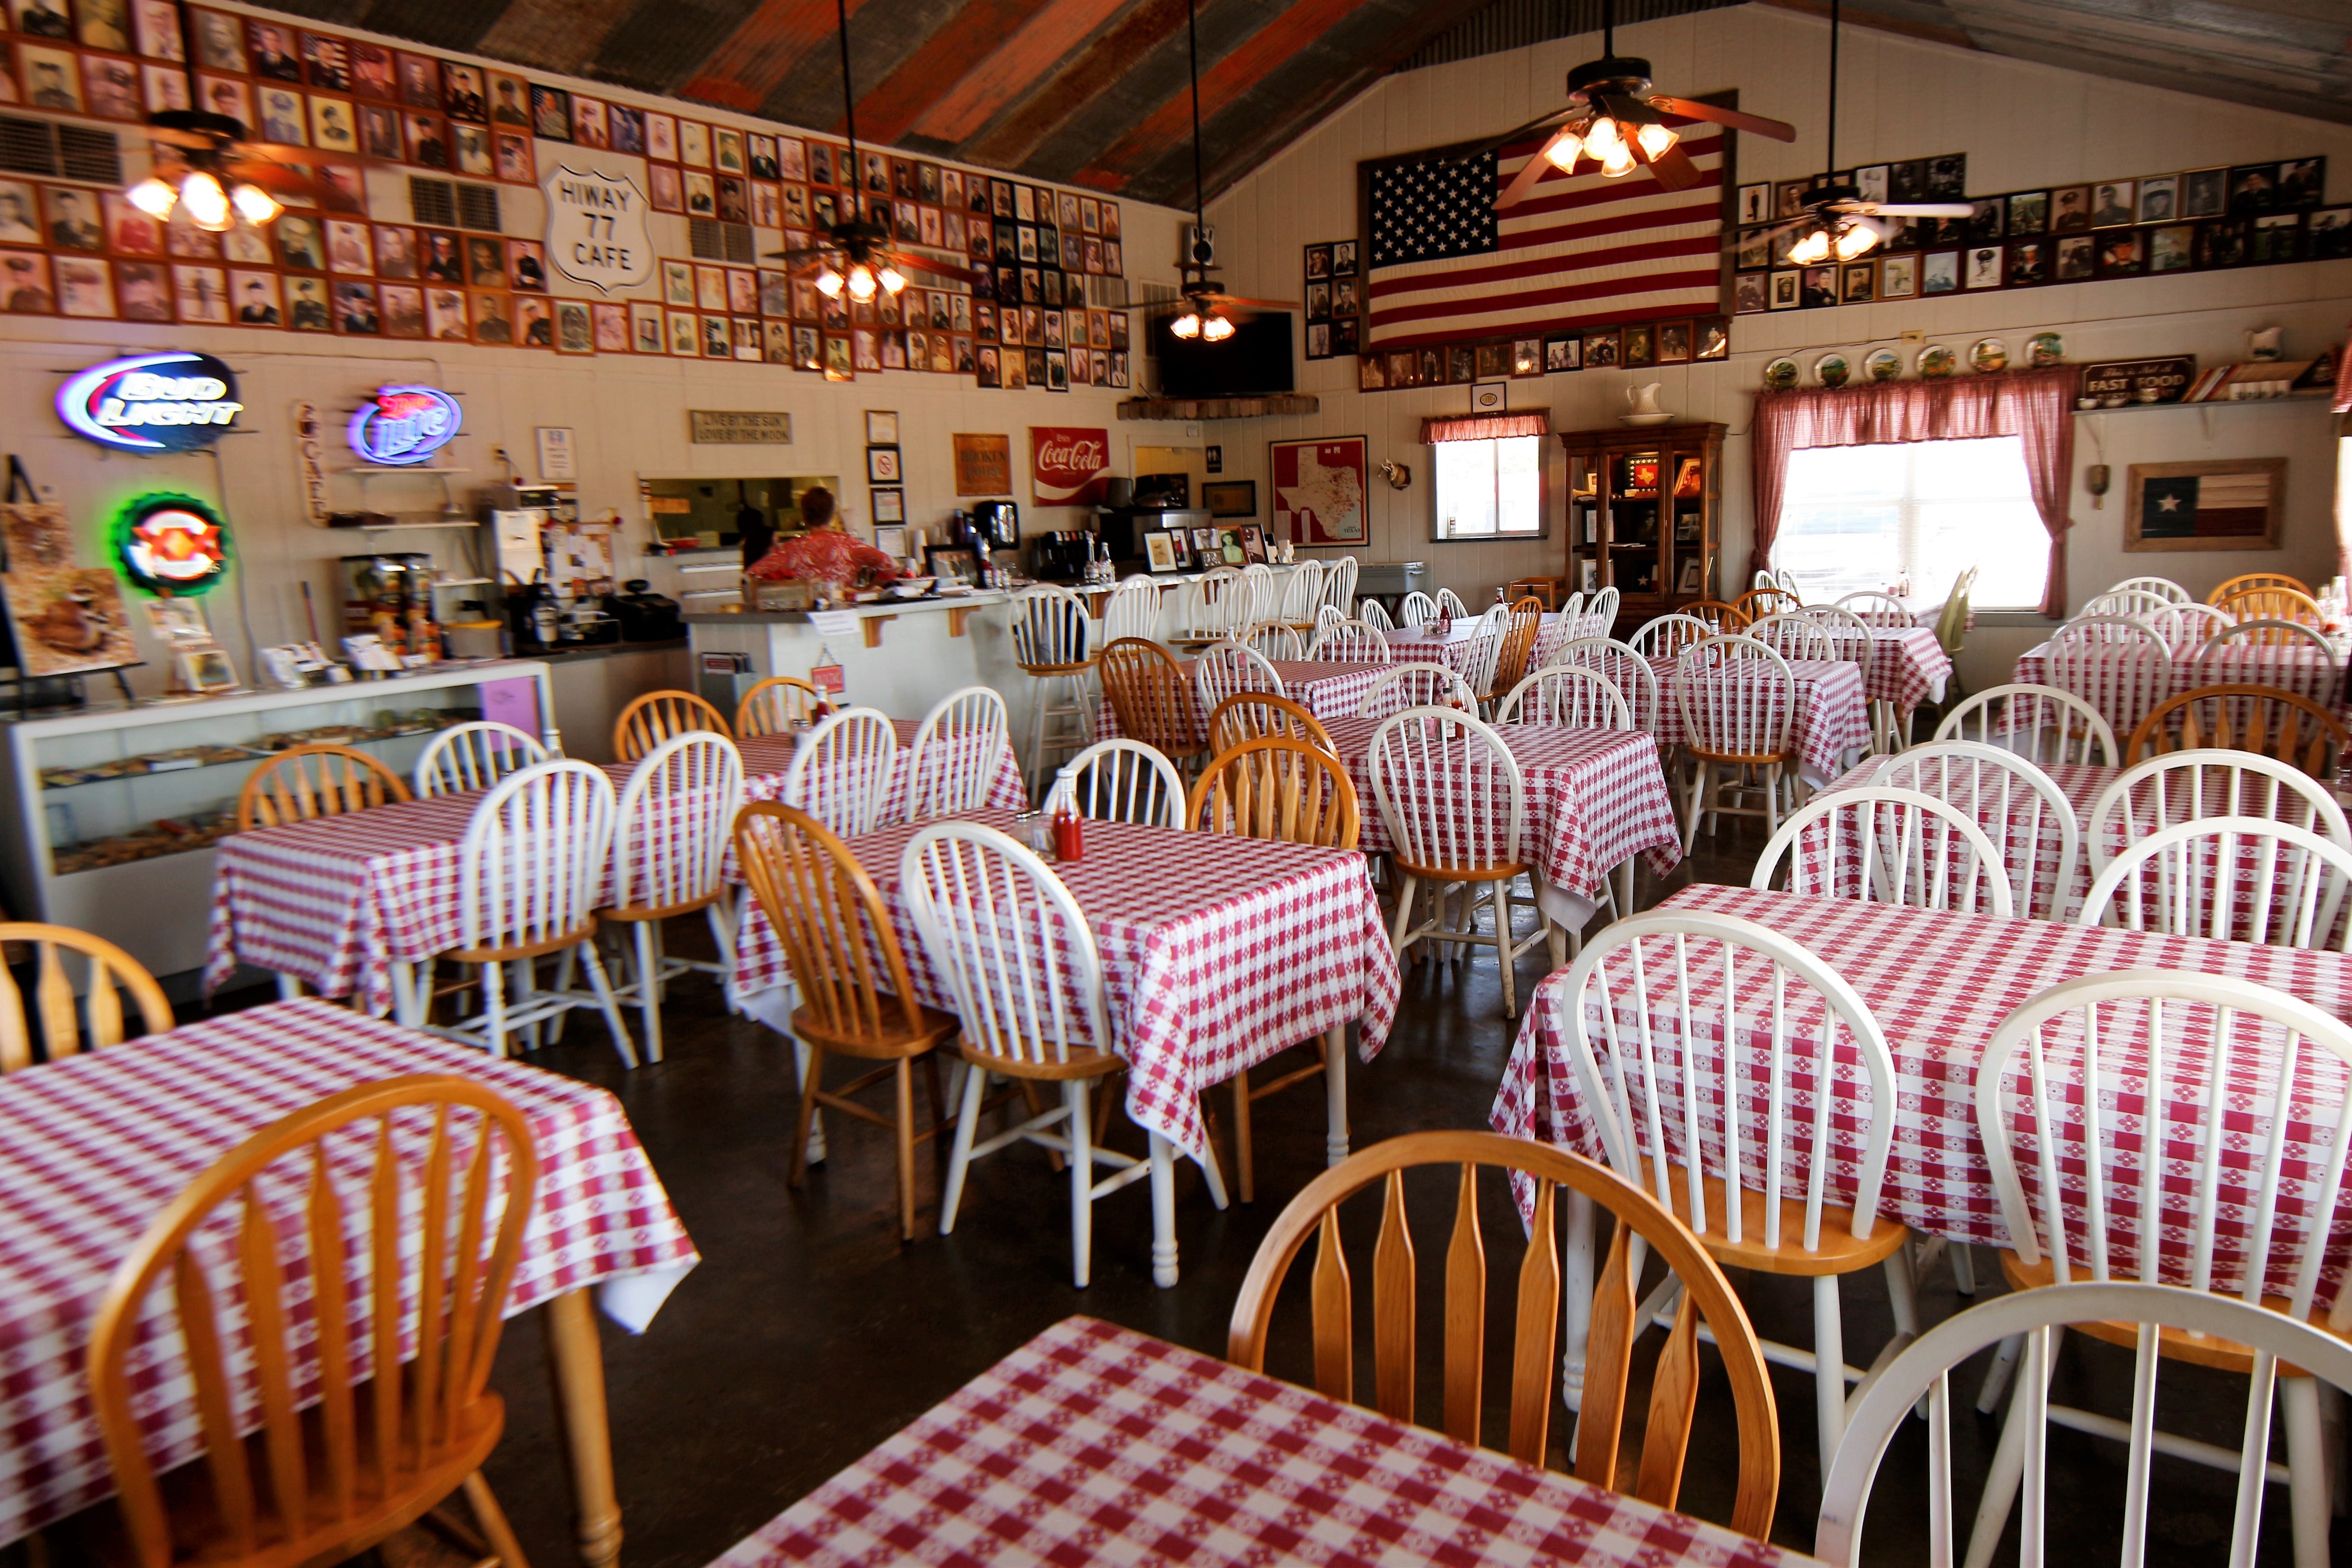 Interior of Cafe on Hwy 77 in Texas